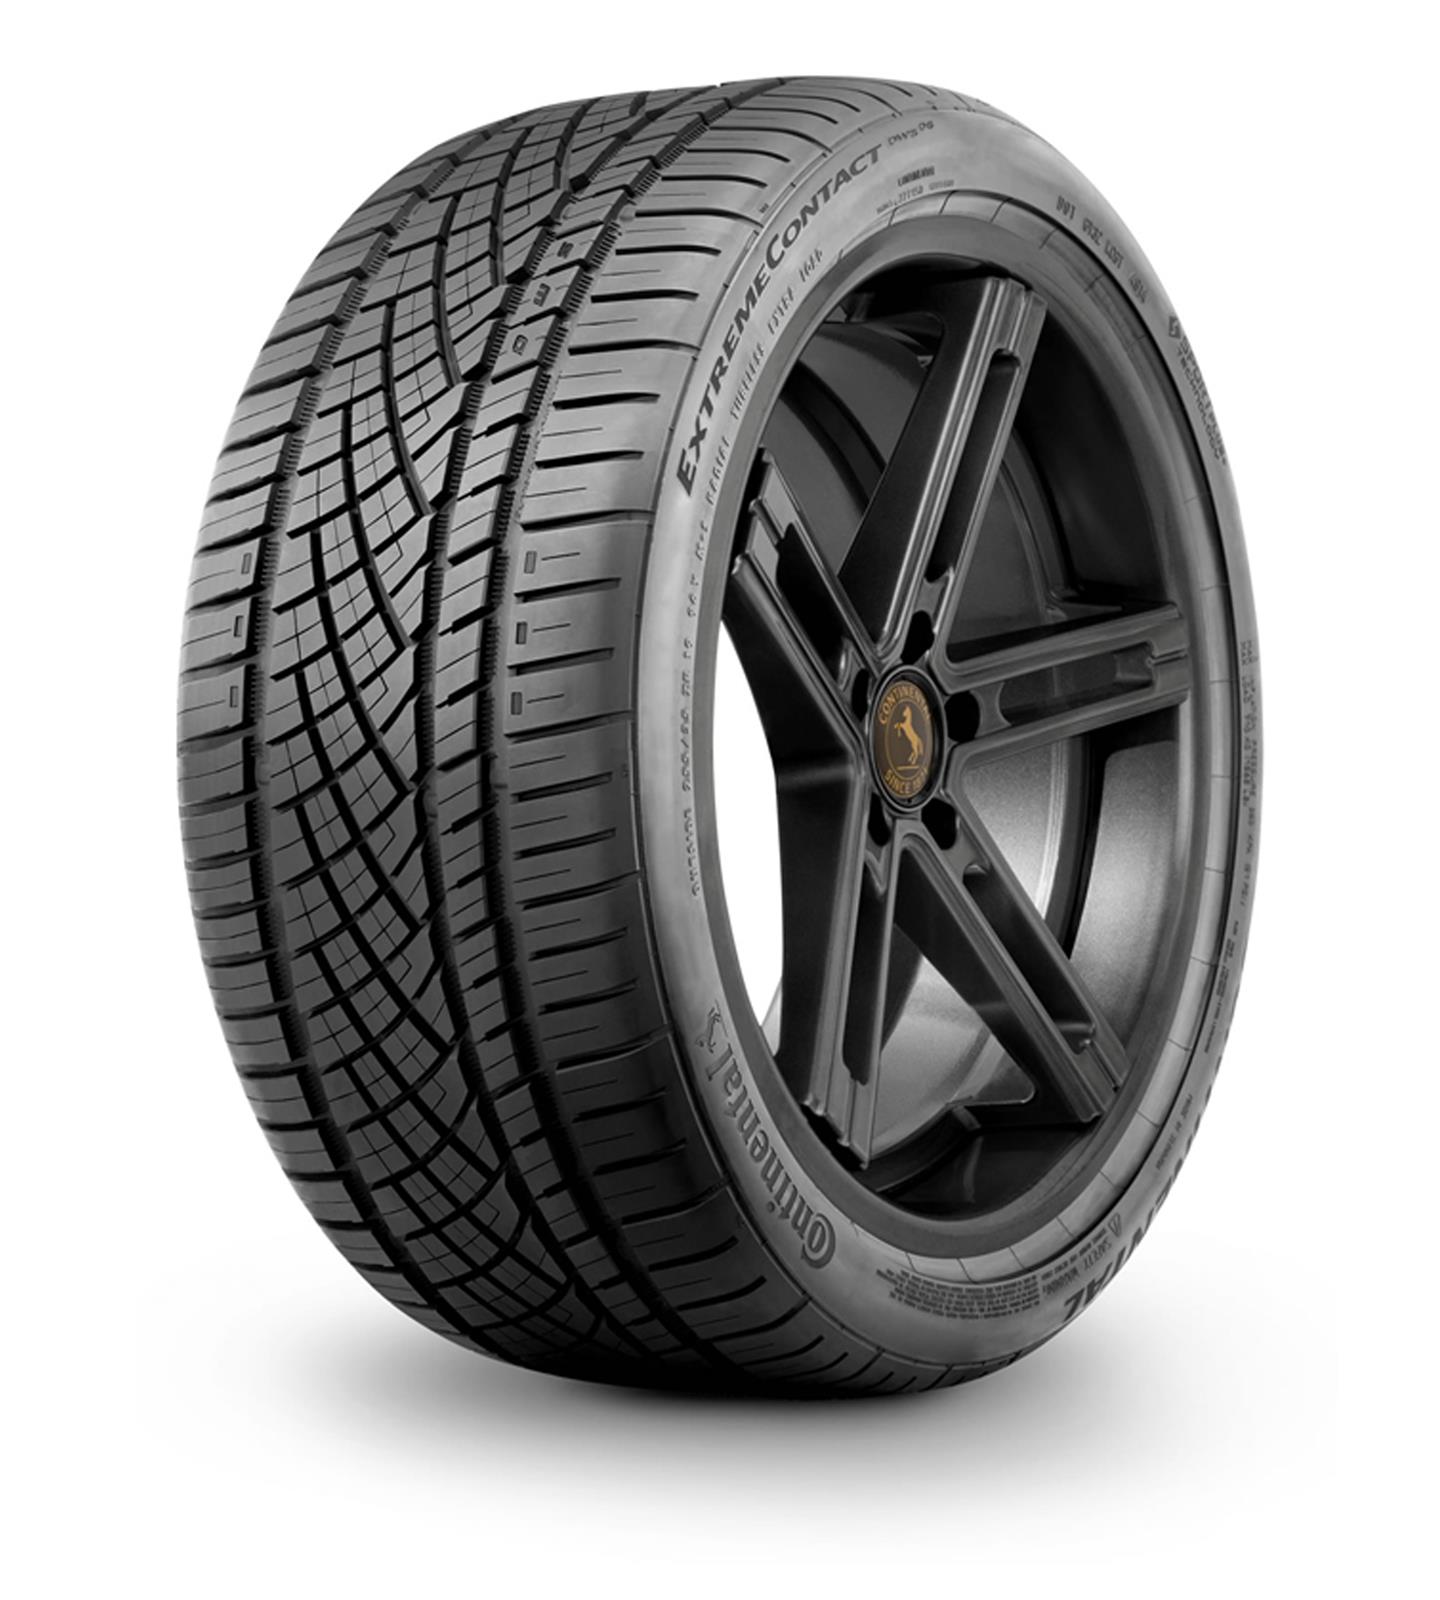 continental-tire-15499770000-continental-extremecontact-dws06-tires-summit-racing